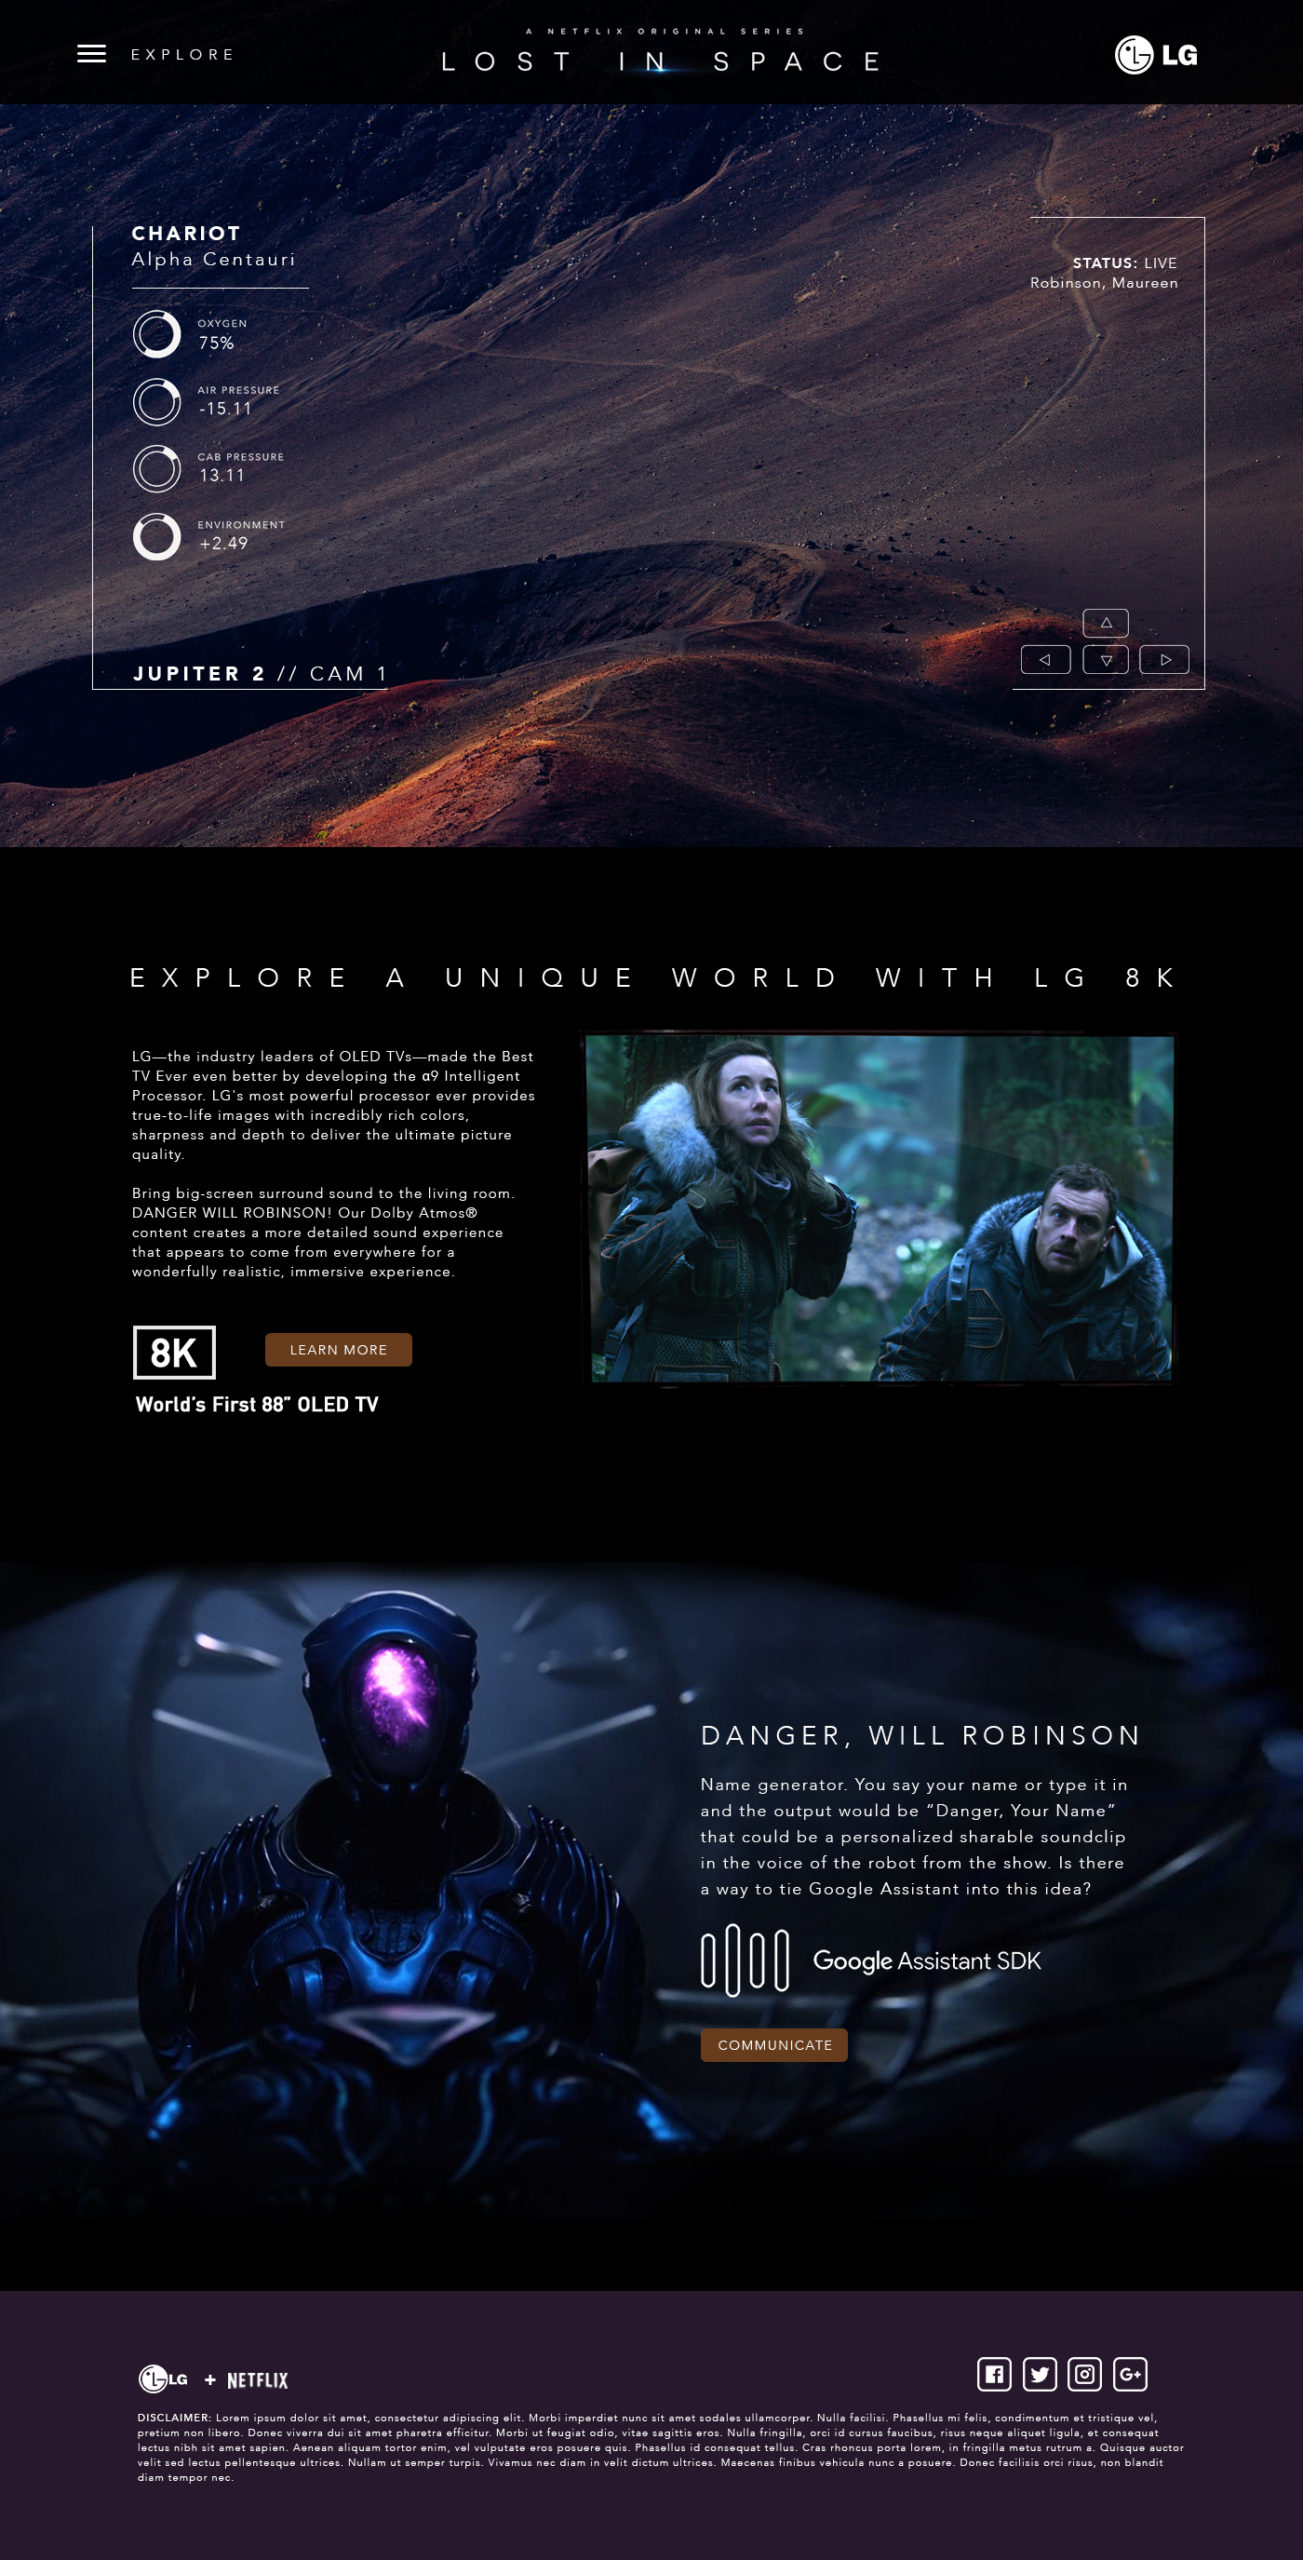 Lost_In_Space_microsite_interface-scaled